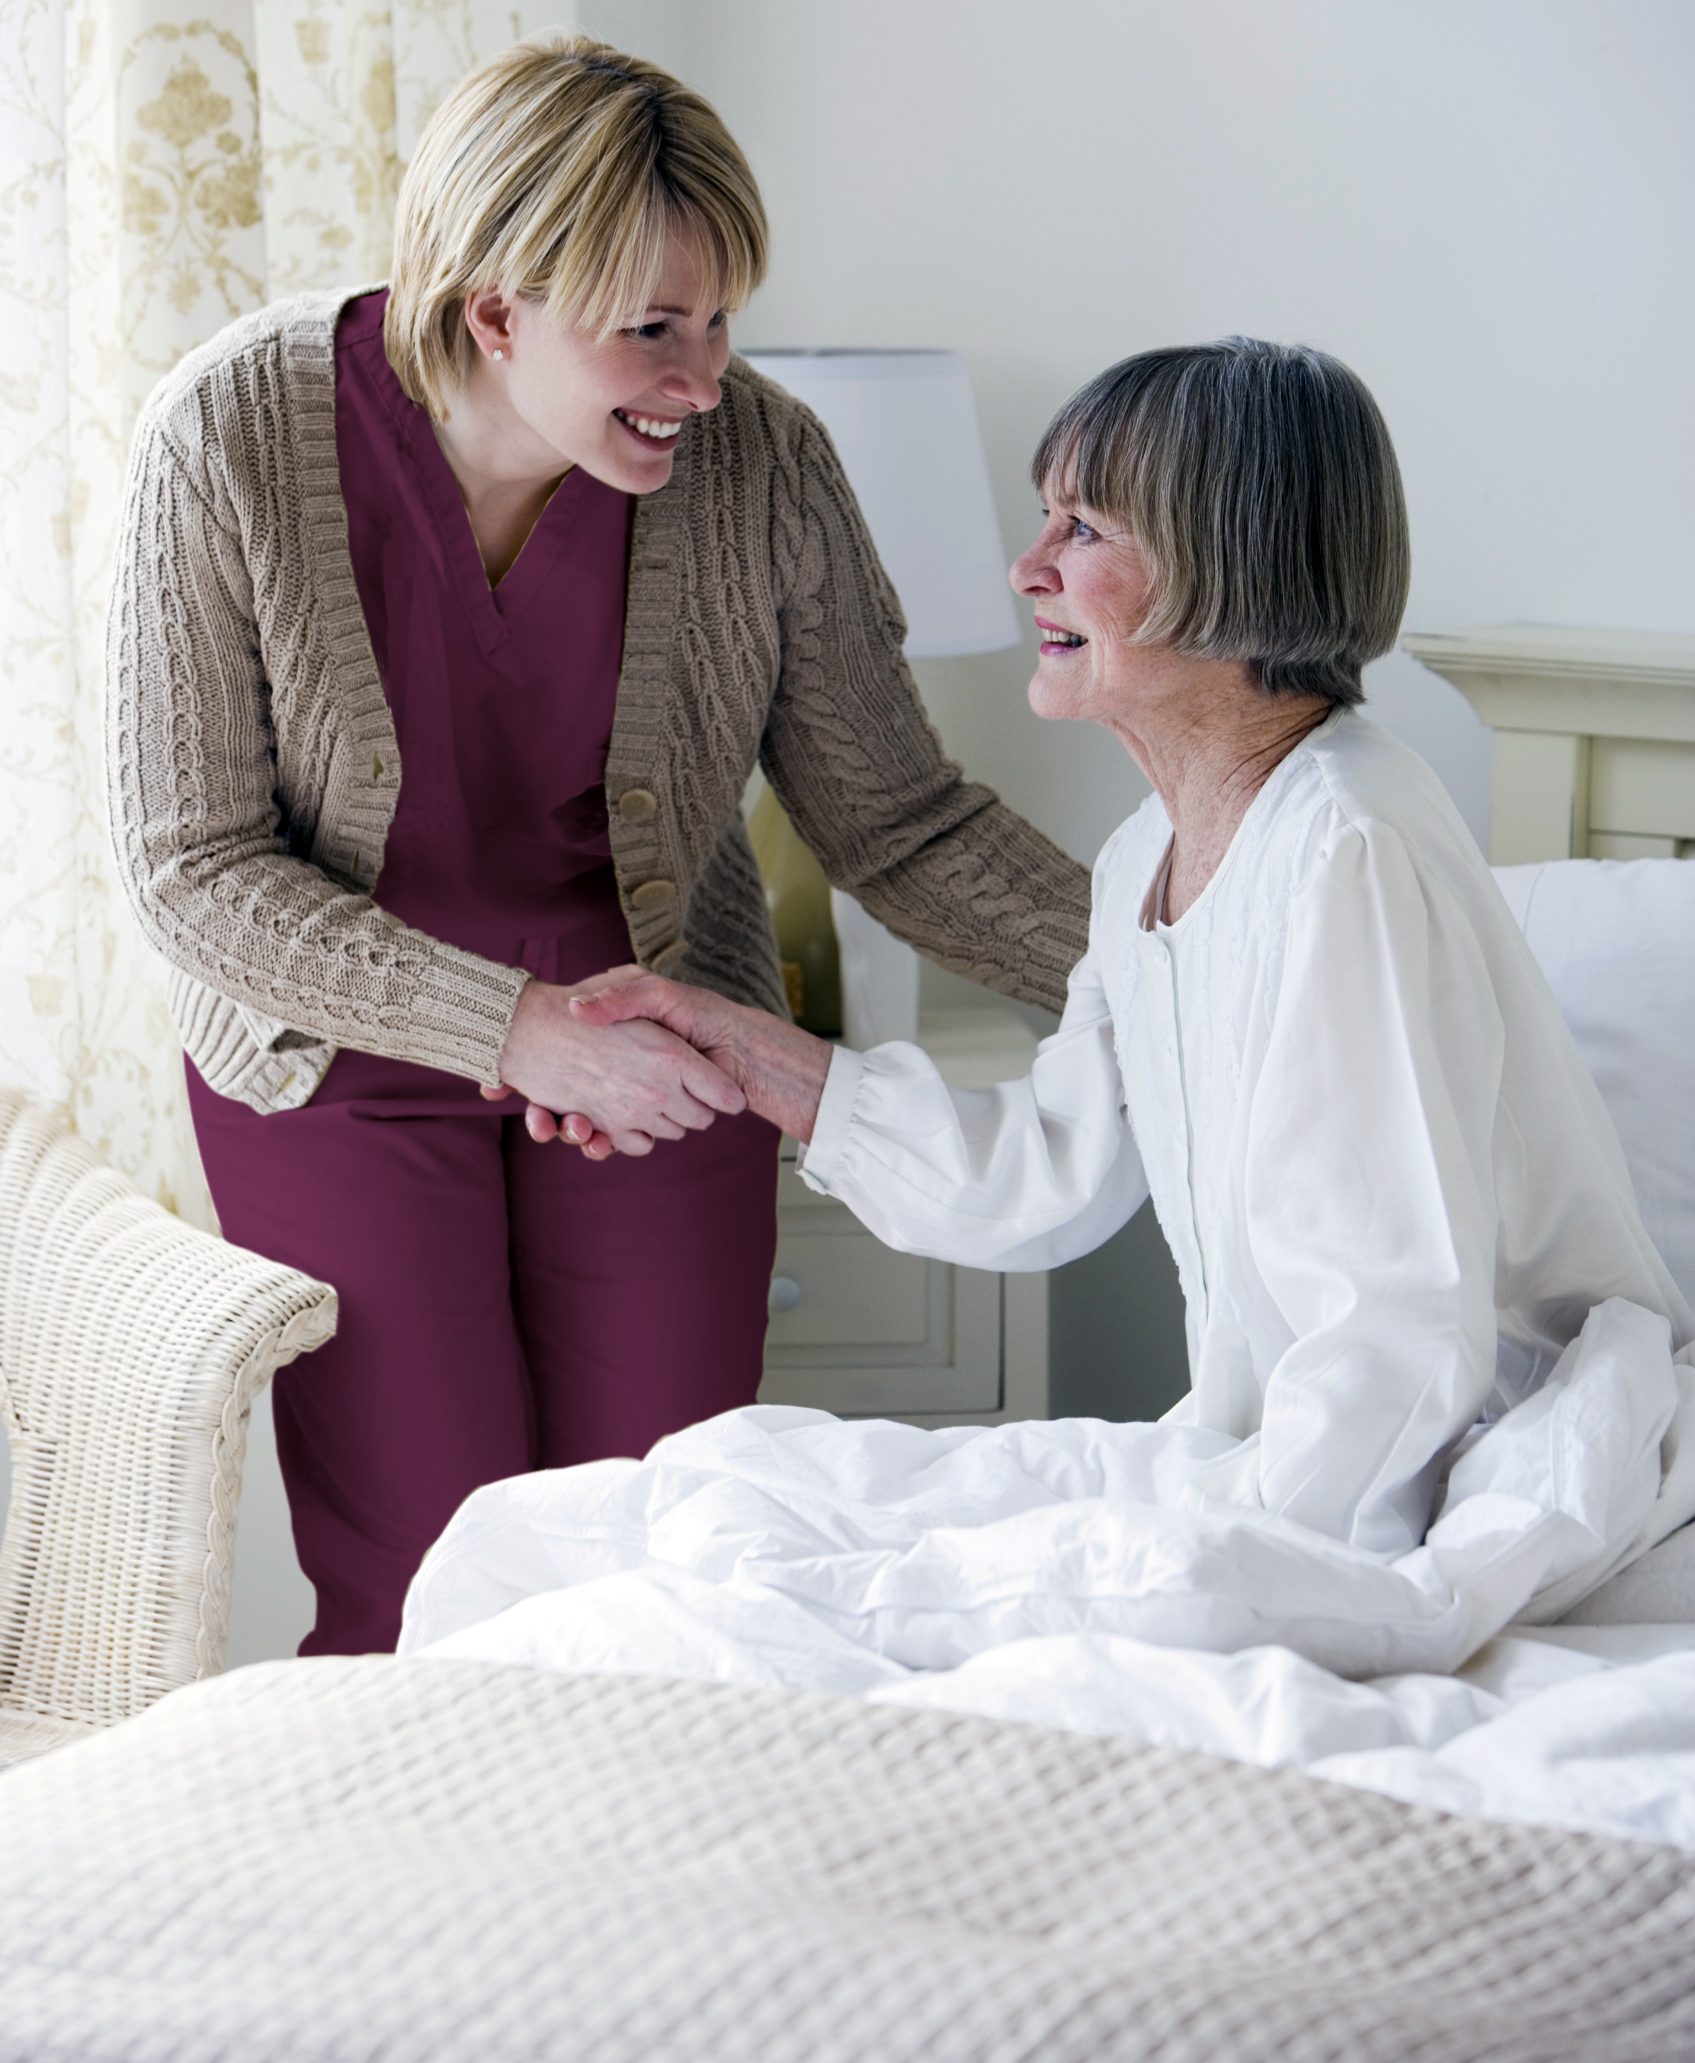 Our Caregivers help keep seniors safe at home.